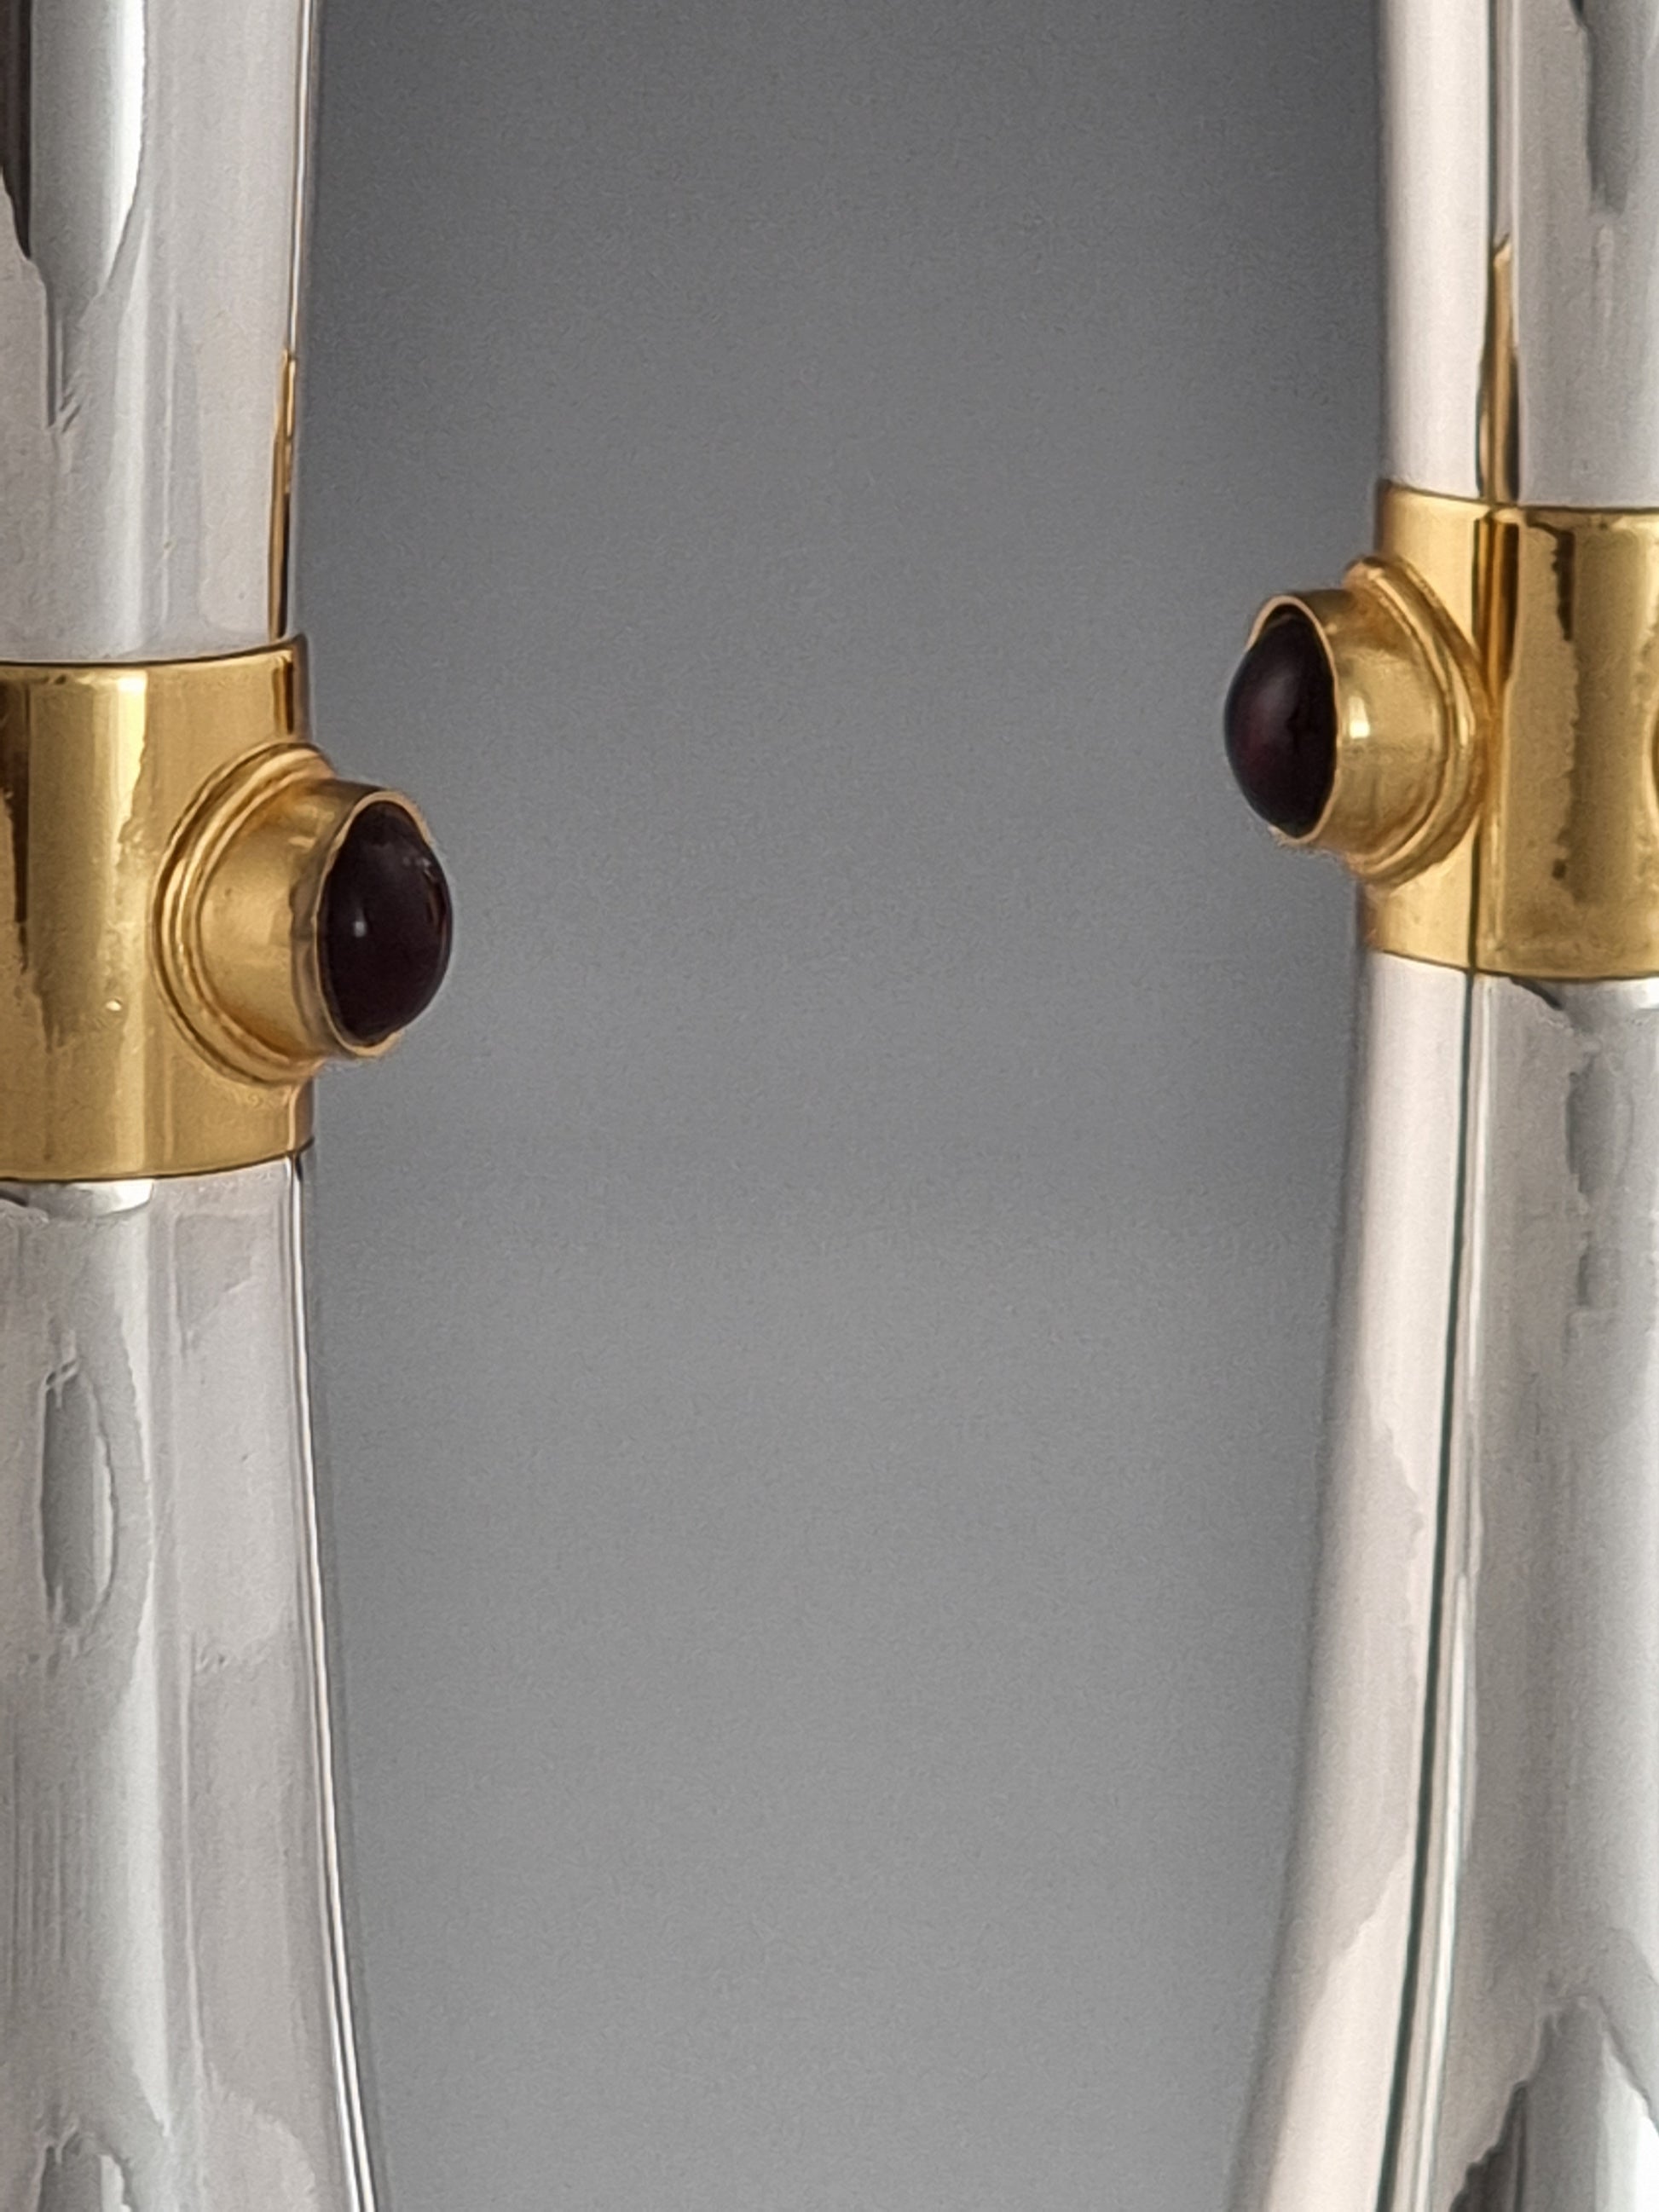 Close-up view of the Deborah candlesticks showing the ribbon and stones